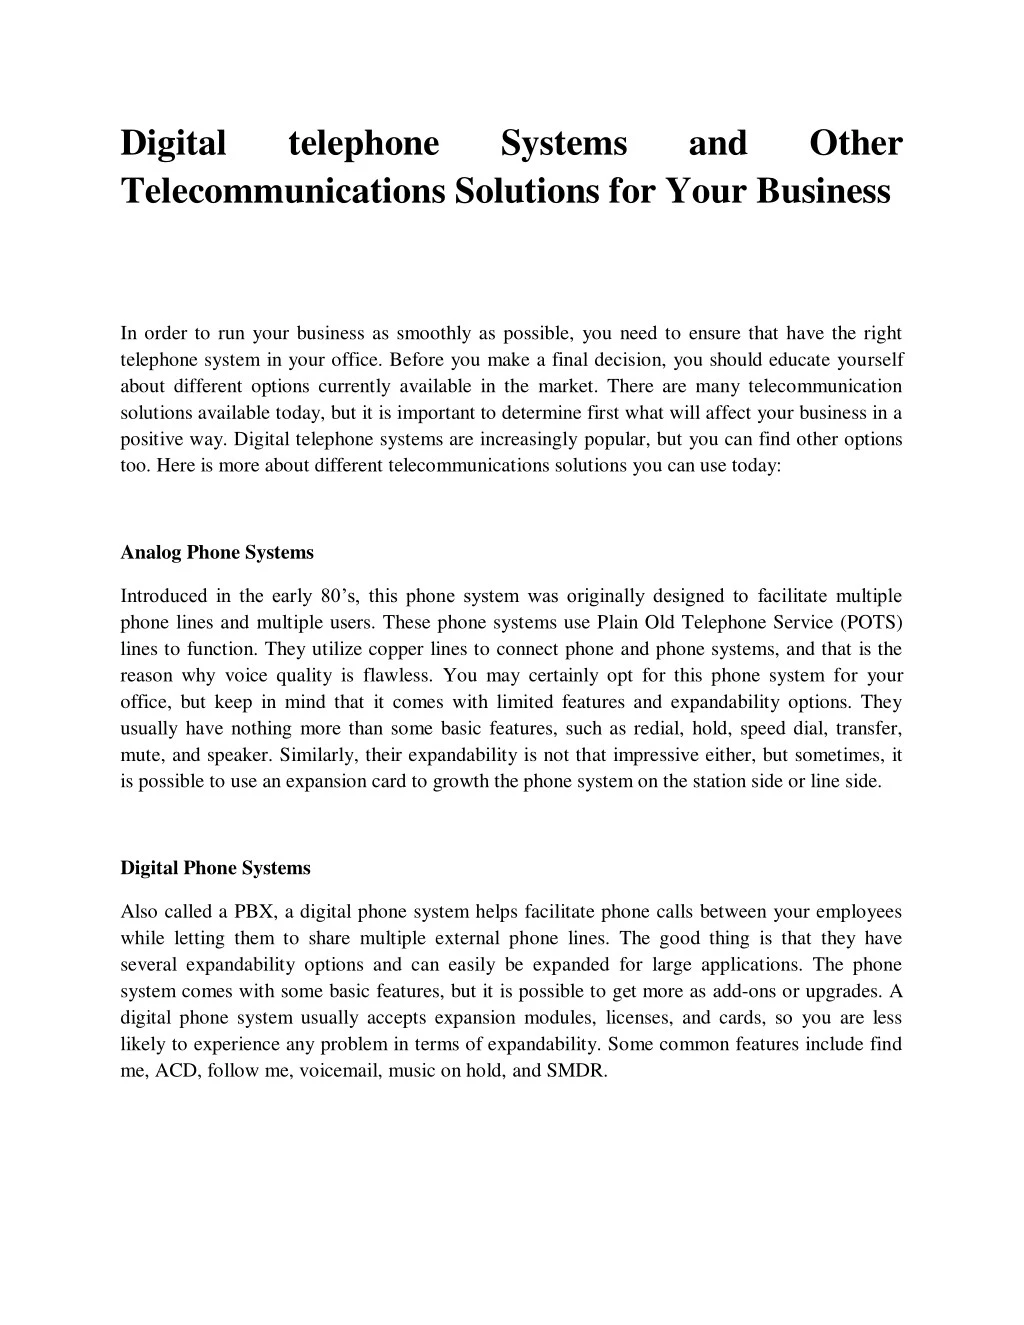 digital telecommunications solutions for your